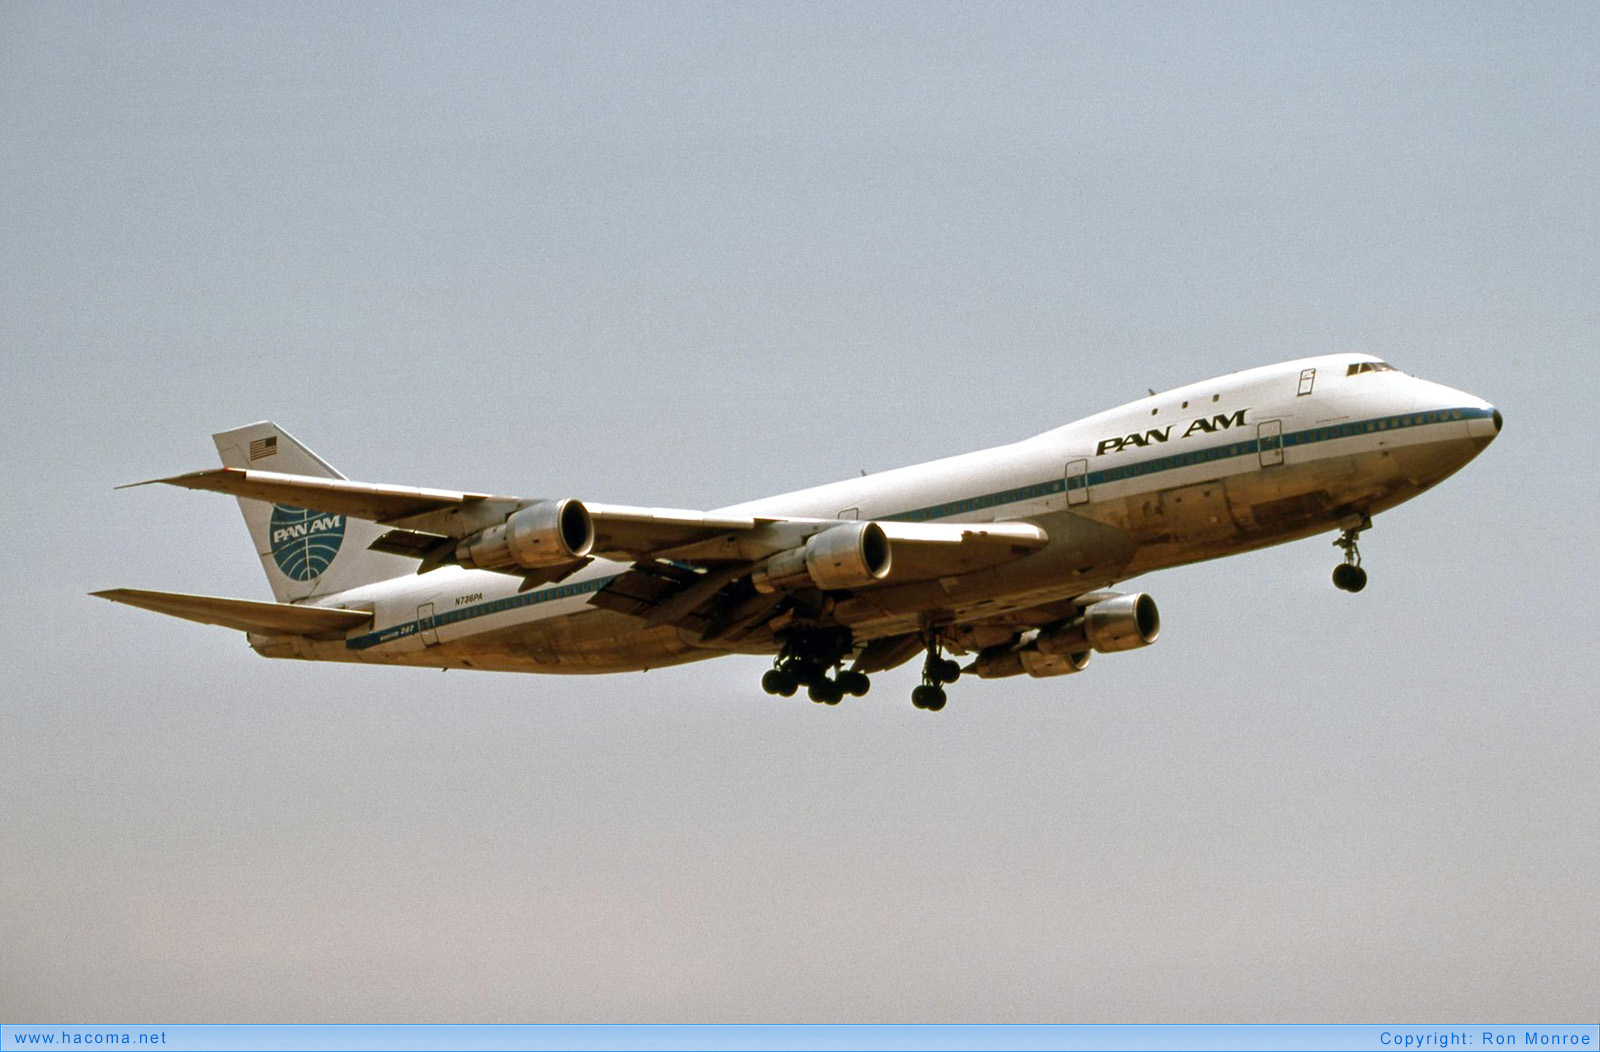 Photo of N736PA - Pan Am Clipper Mayflower / Young America / Victor - Los Angeles International Airport - Jun 1976